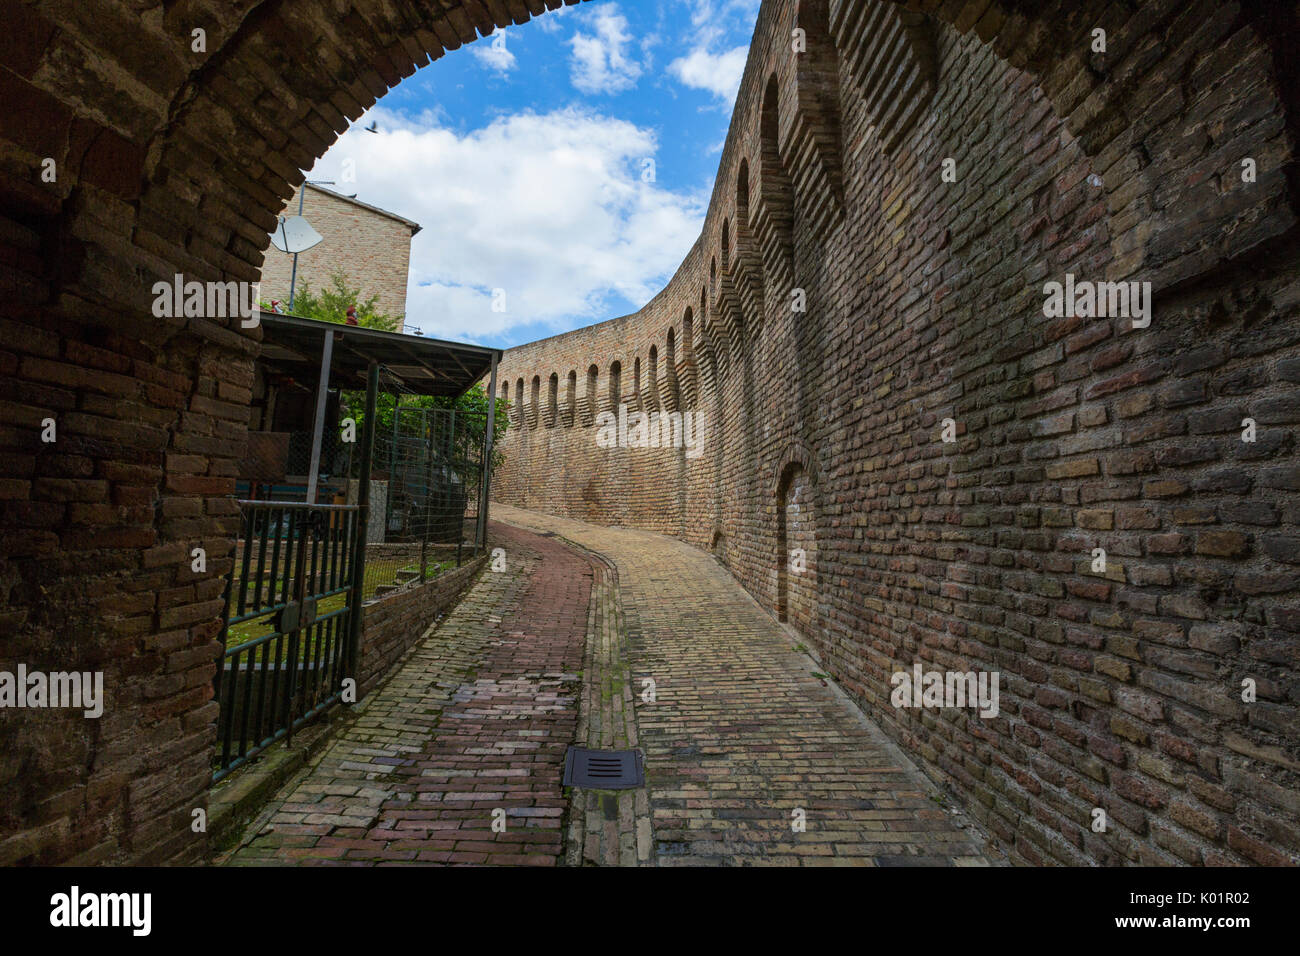 A typical alley and medieval walls of the old town of Corinaldo Province of Ancona Marche Italy Europe Stock Photo